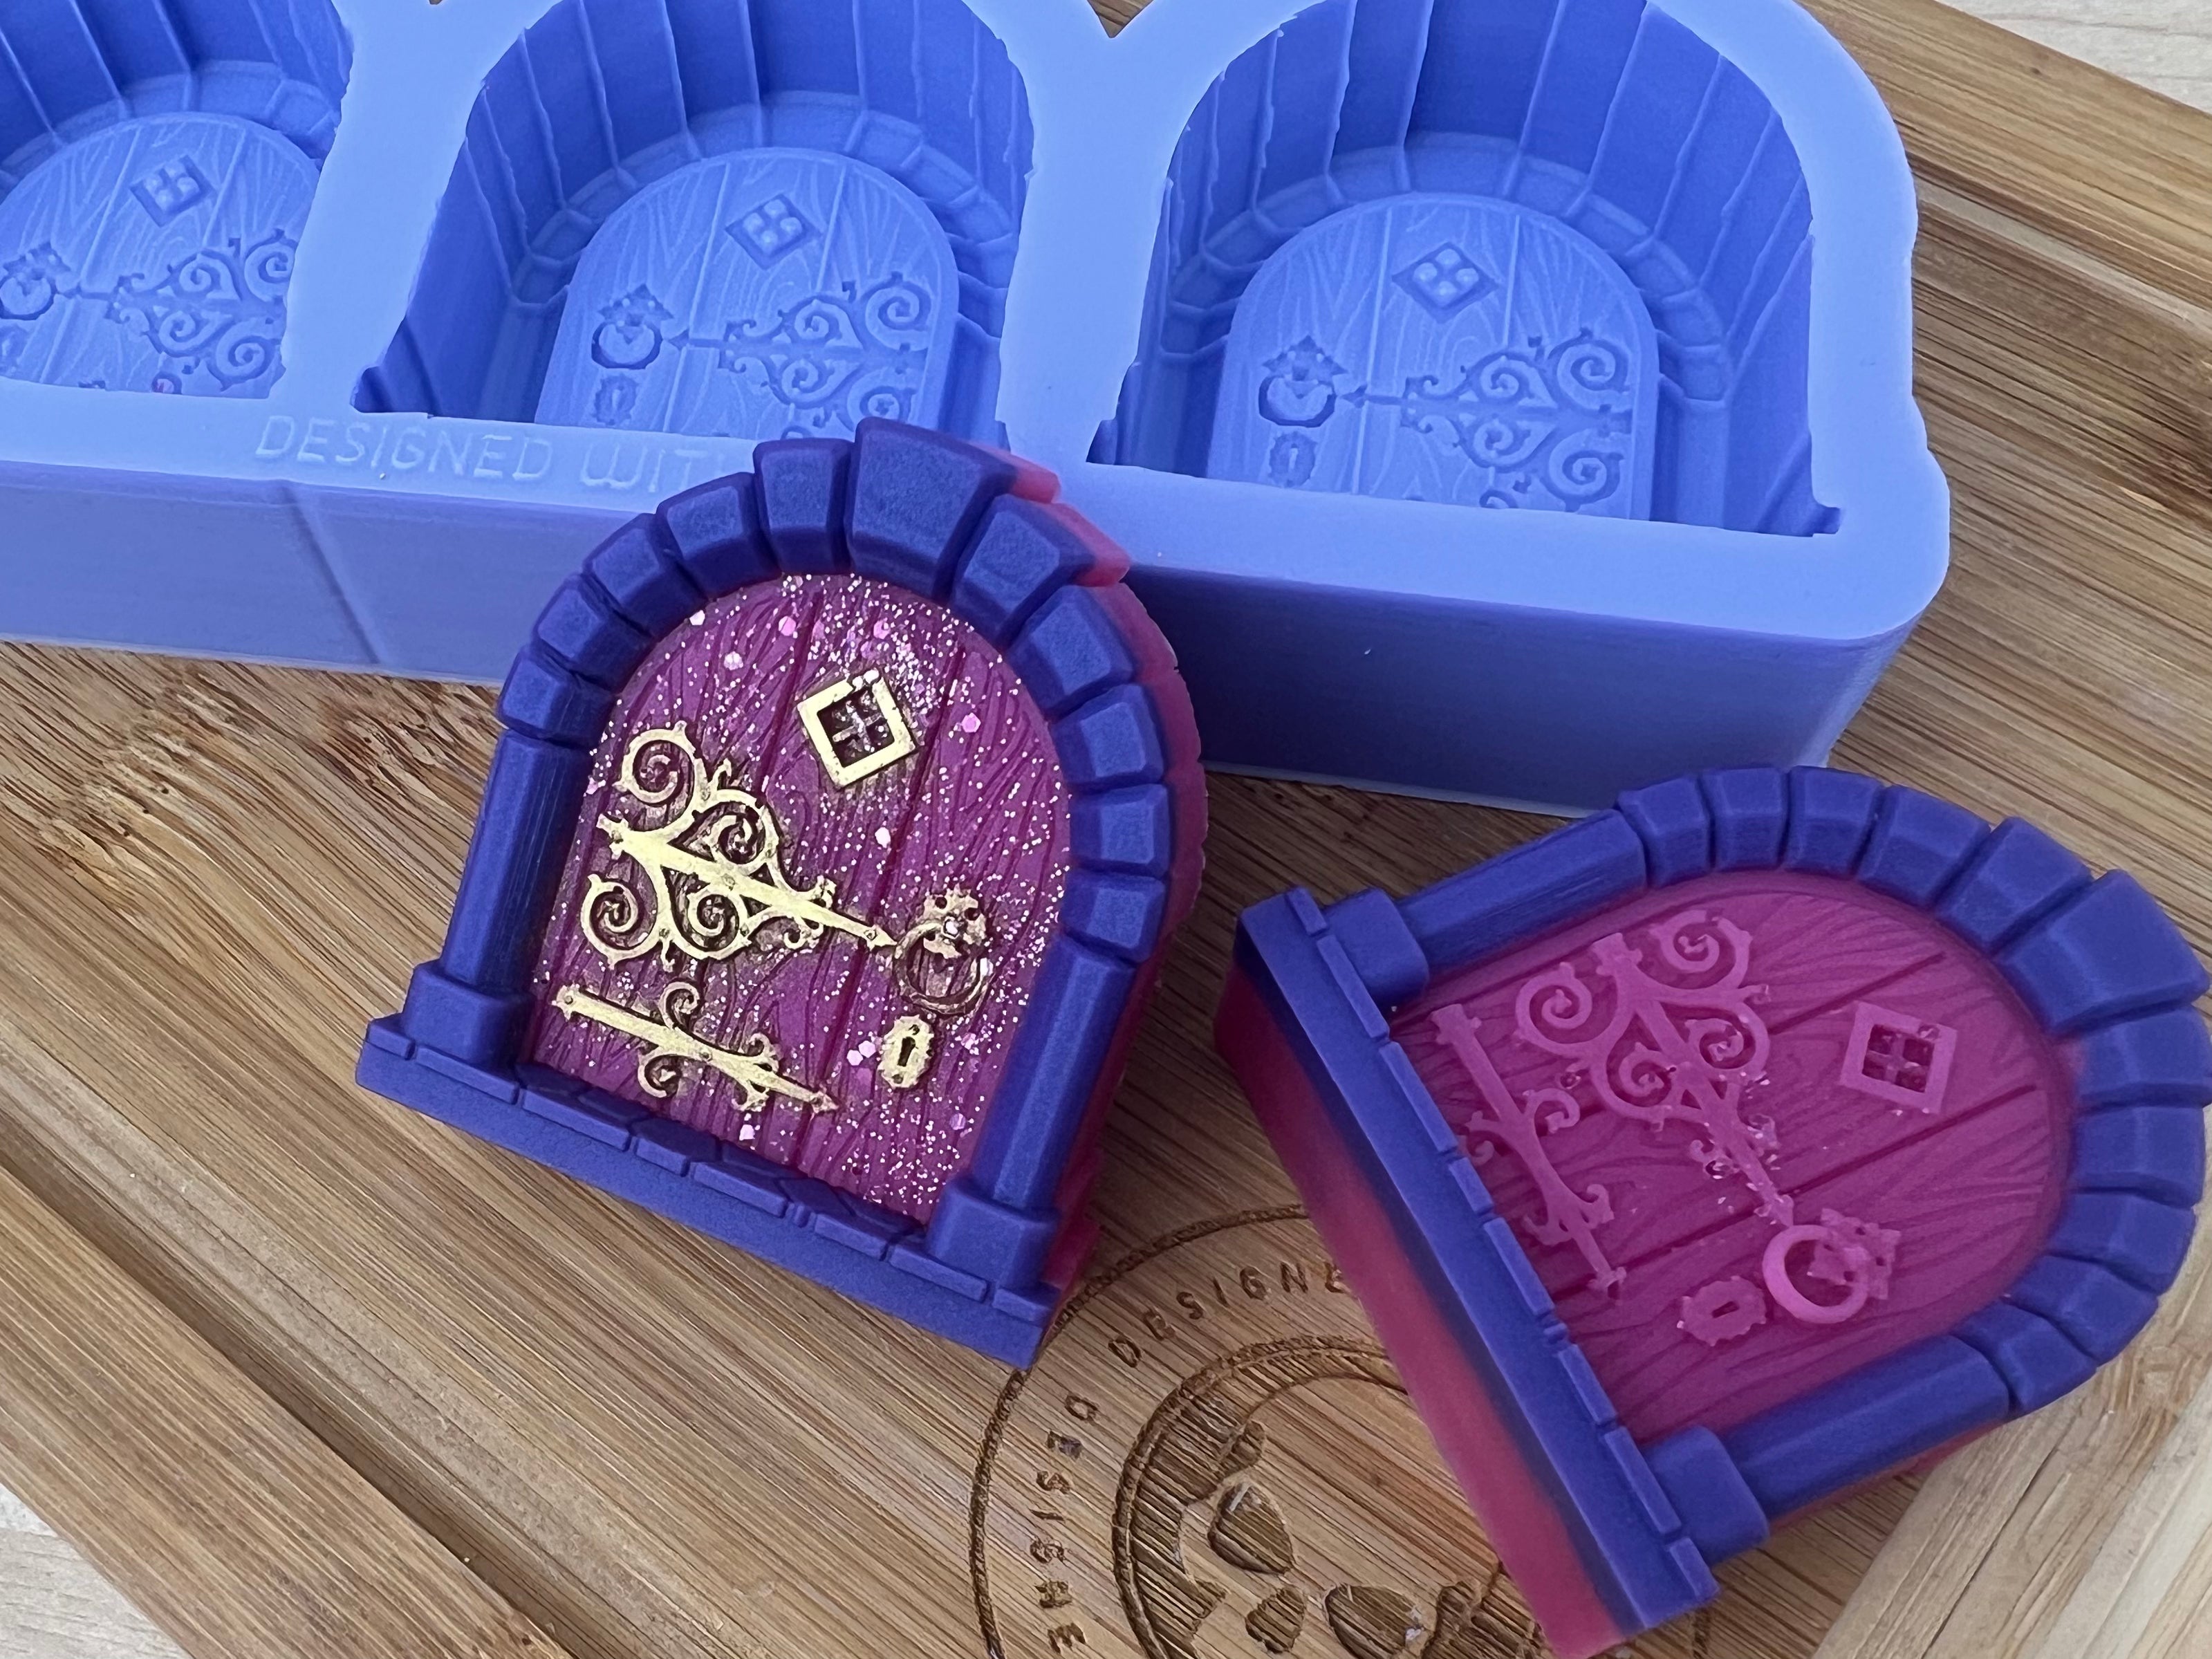 3D Fairy Door Wax Melt Silicone Mold - Designed with a Twist - Top quality silicone molds made in the UK.